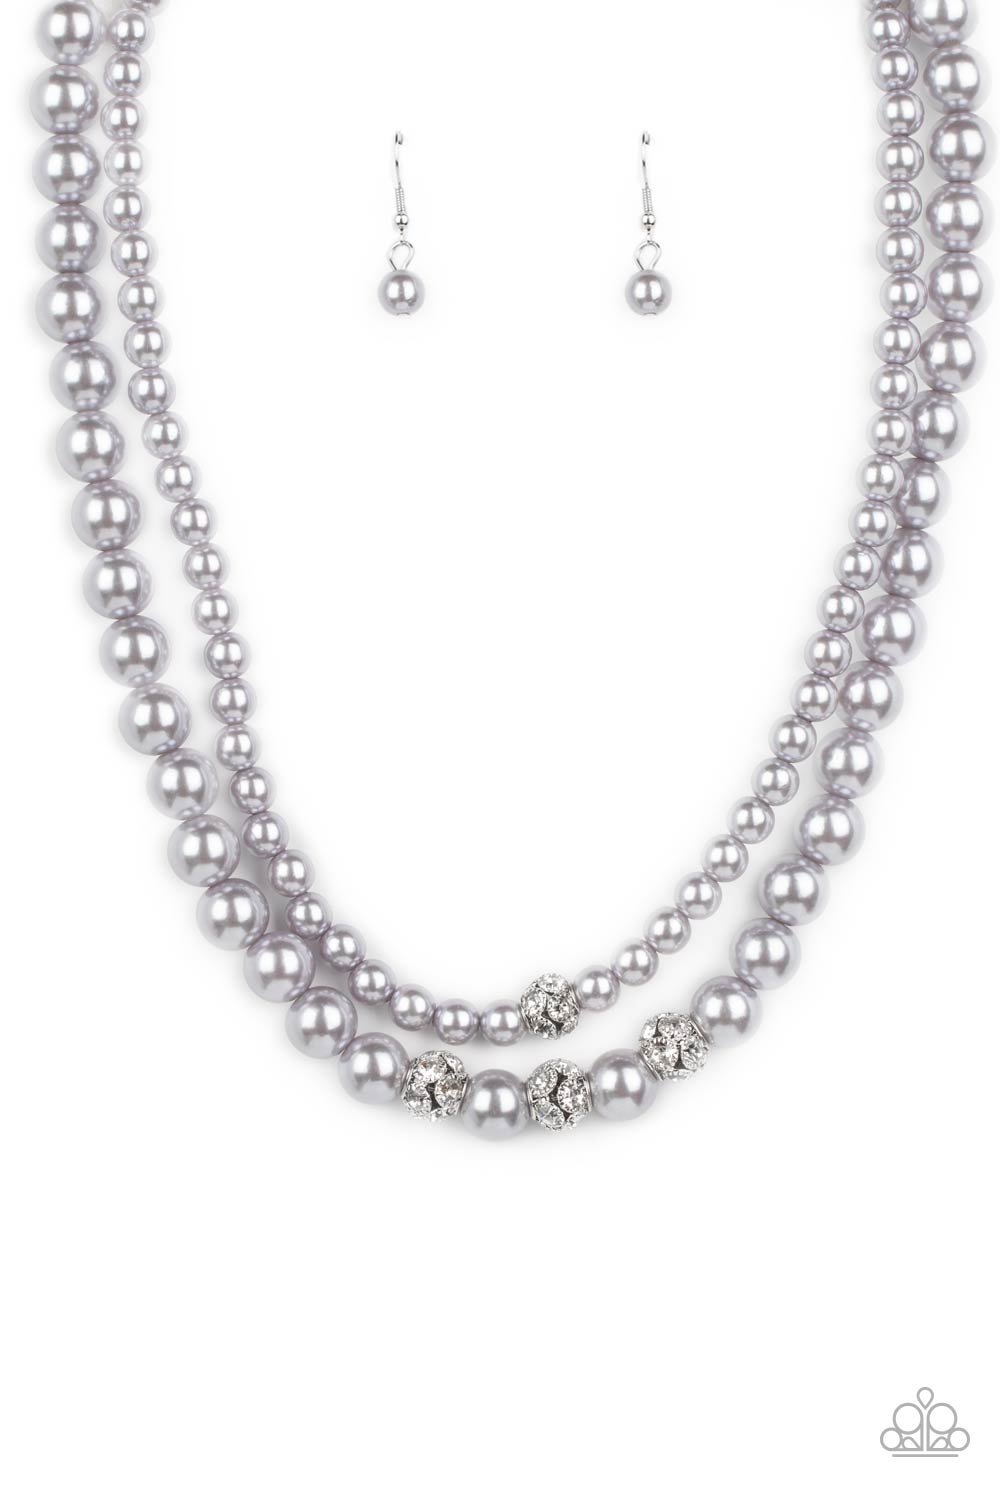 Paparazzi Accessories - Brilliant Ballerina - Silver Pearl Necklaces two strands of classic silver pearls in varying sizes coalesce around the collar in a refined fashion. Silver beads, encrusted in white rhinestones, introduce shimmery detail to each pearly layer, adding a playful spark of shimmer to the timeless design. Features an adjustable clasp closure.  Sold as one individual necklace. Includes one pair of matching earrings.